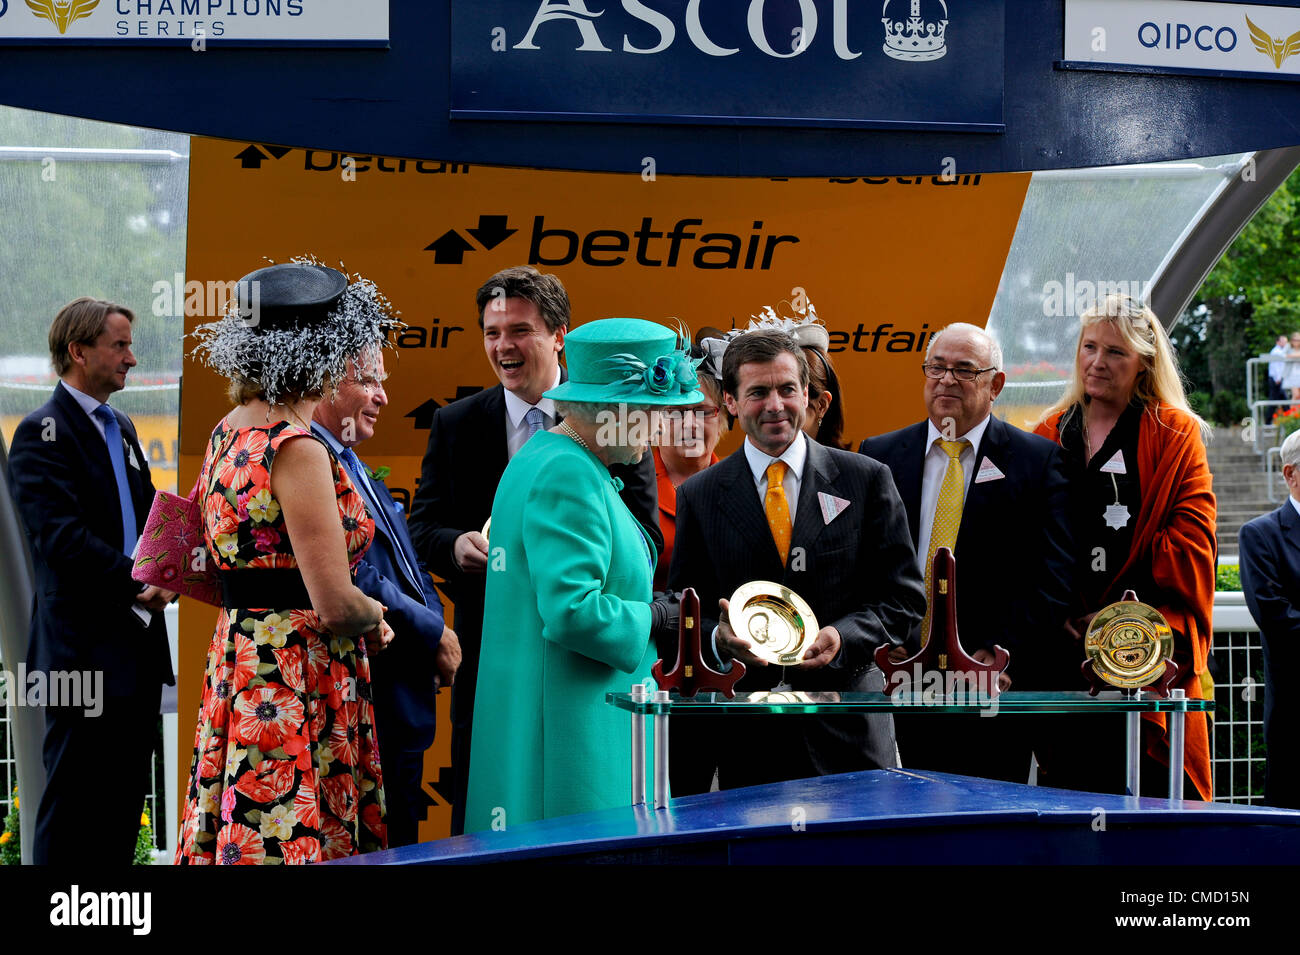 21.07.2012 Ascot, England. The King George VI and Queen Elizabeth Stakes. Her Royal Highness Queen Elizabeth present a cup to  Mr  Gestut Burg Ebstein co-owner of the winning horse Danedream,  at the Ascot Betfair Weekend Featuring Property Raceday. Stock Photo